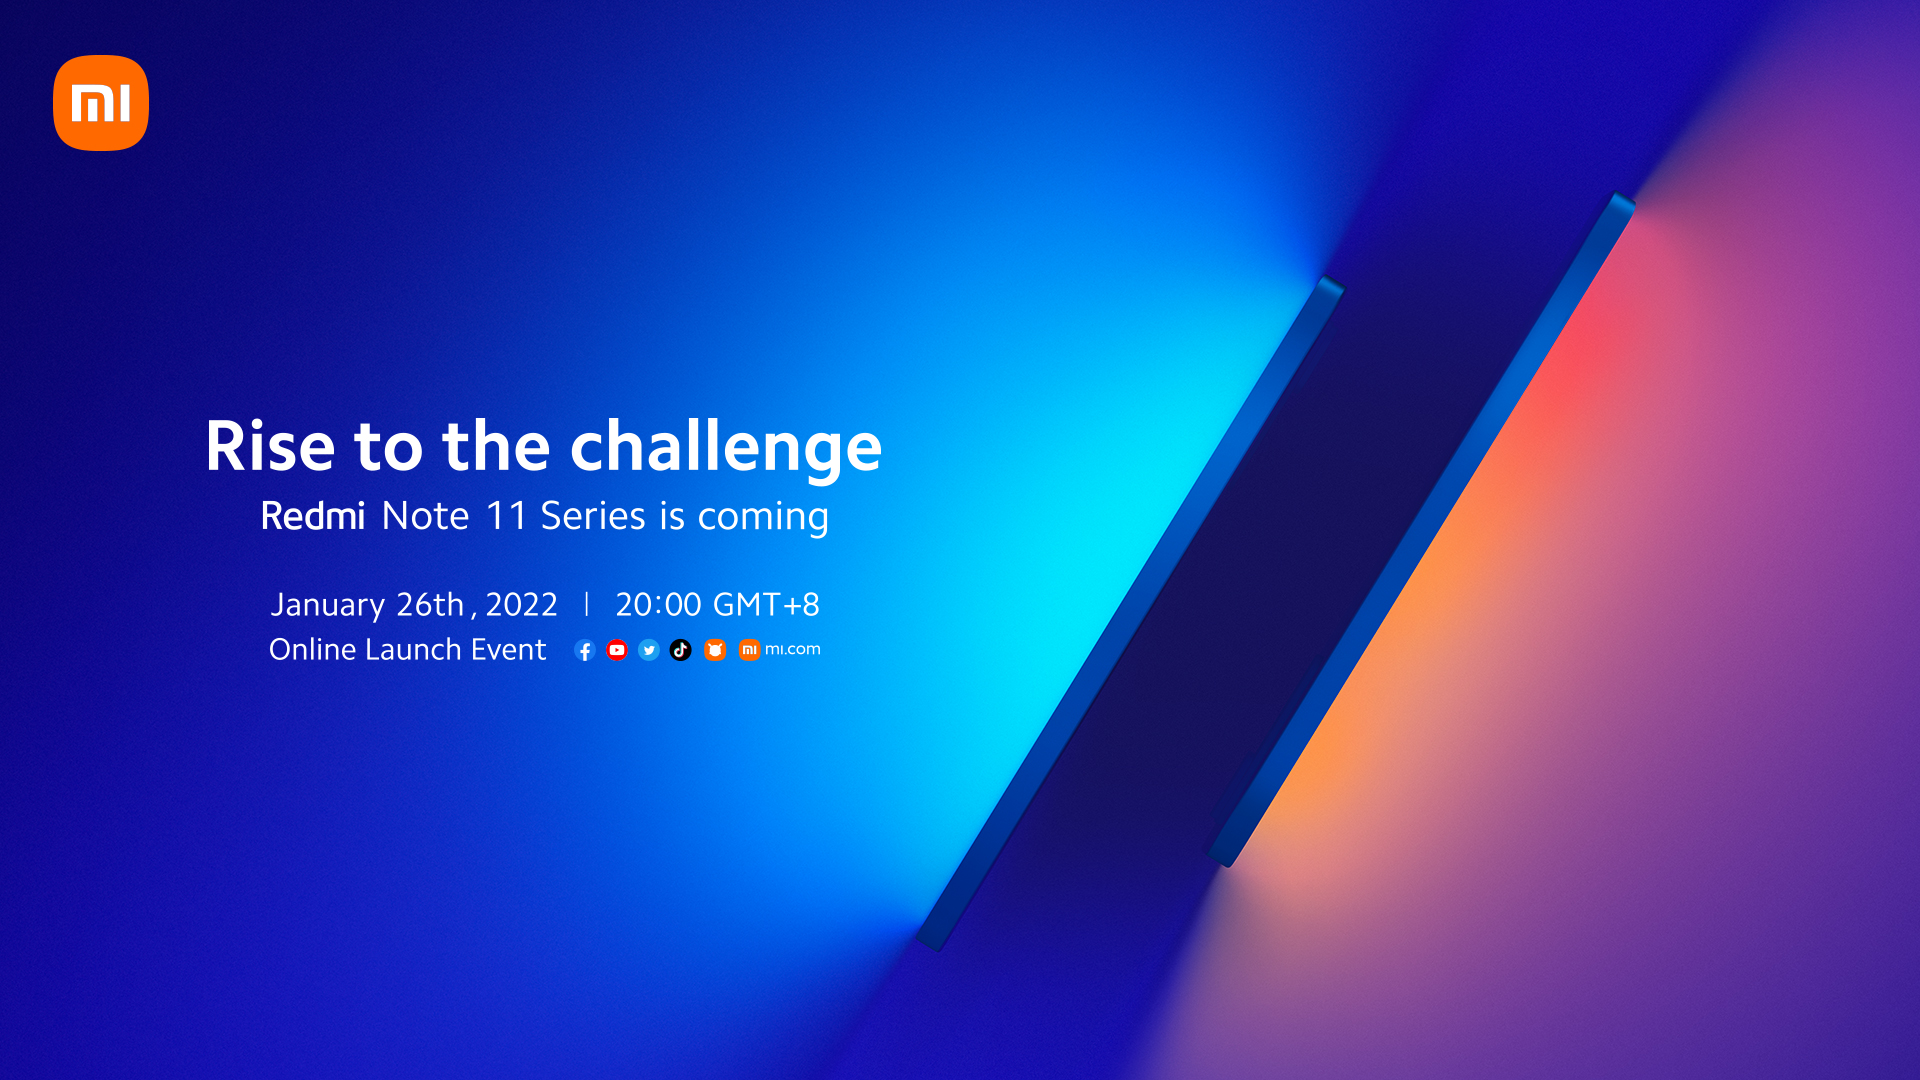 Official: the global presentation of the Redmi Note 11 smartphone line will be held on January 26